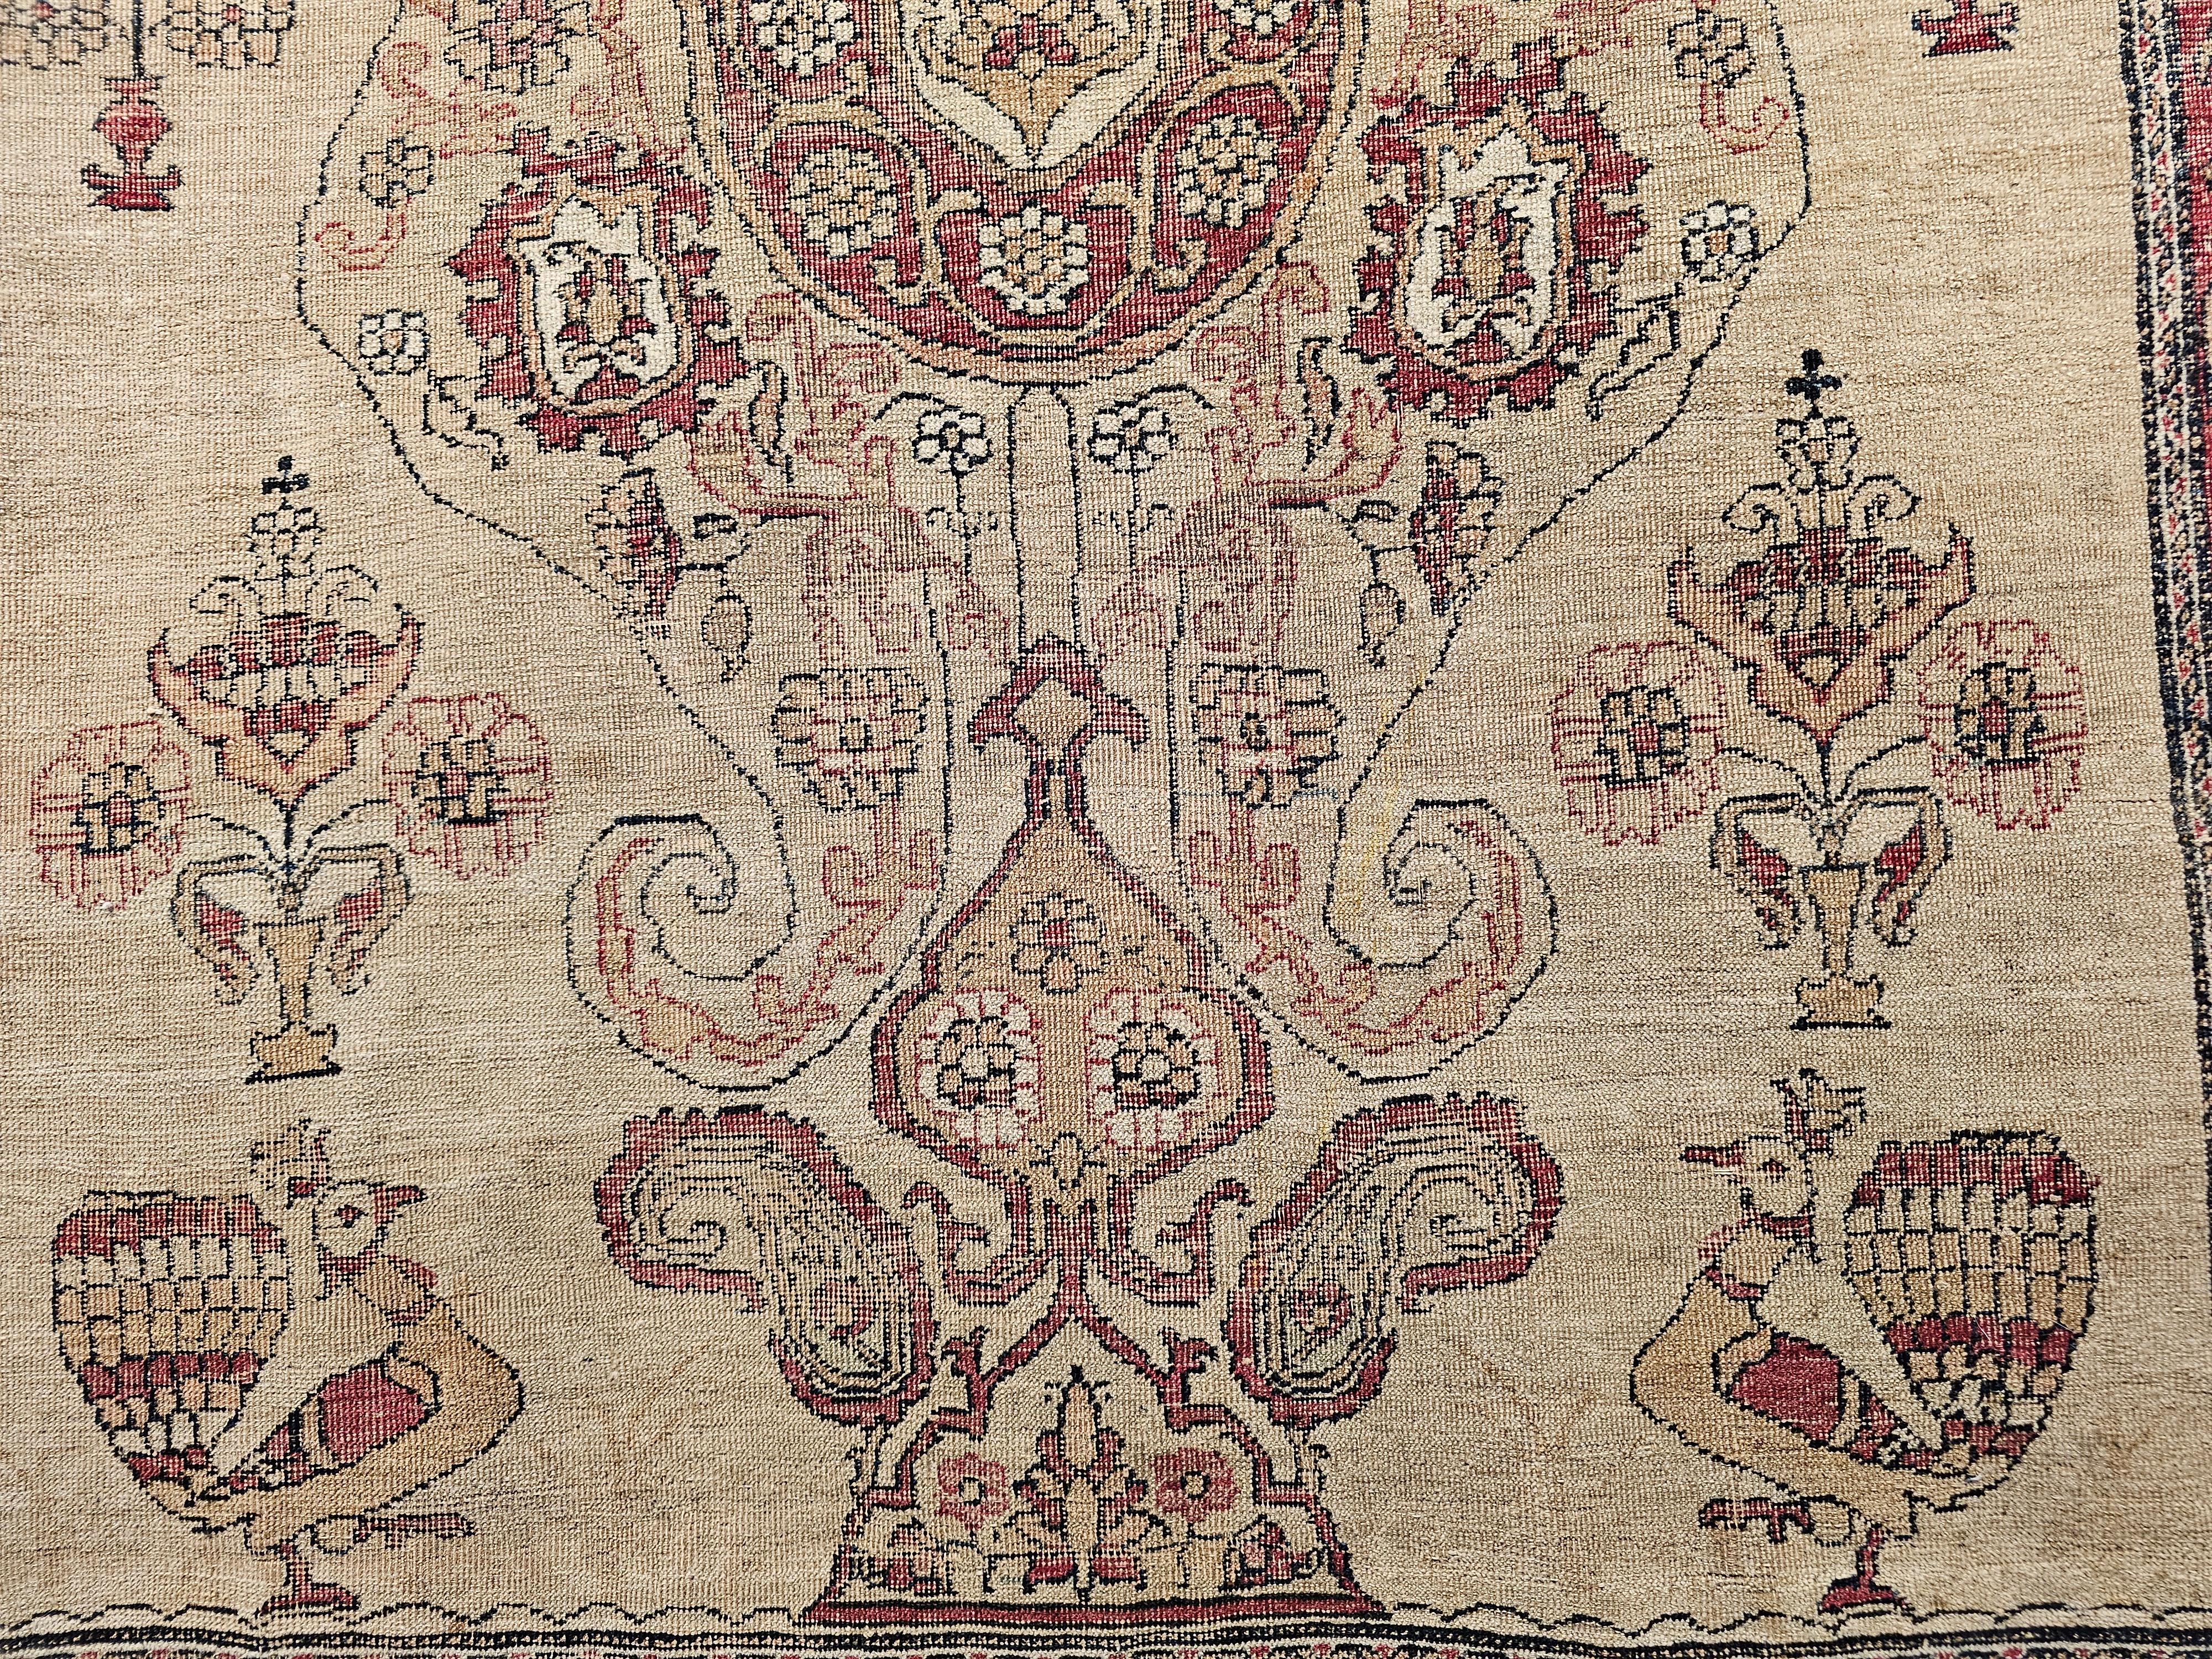 19th Century Persian Kerman Lavar Pictorial “Tree of Life” Rug in Camel, Red For Sale 2